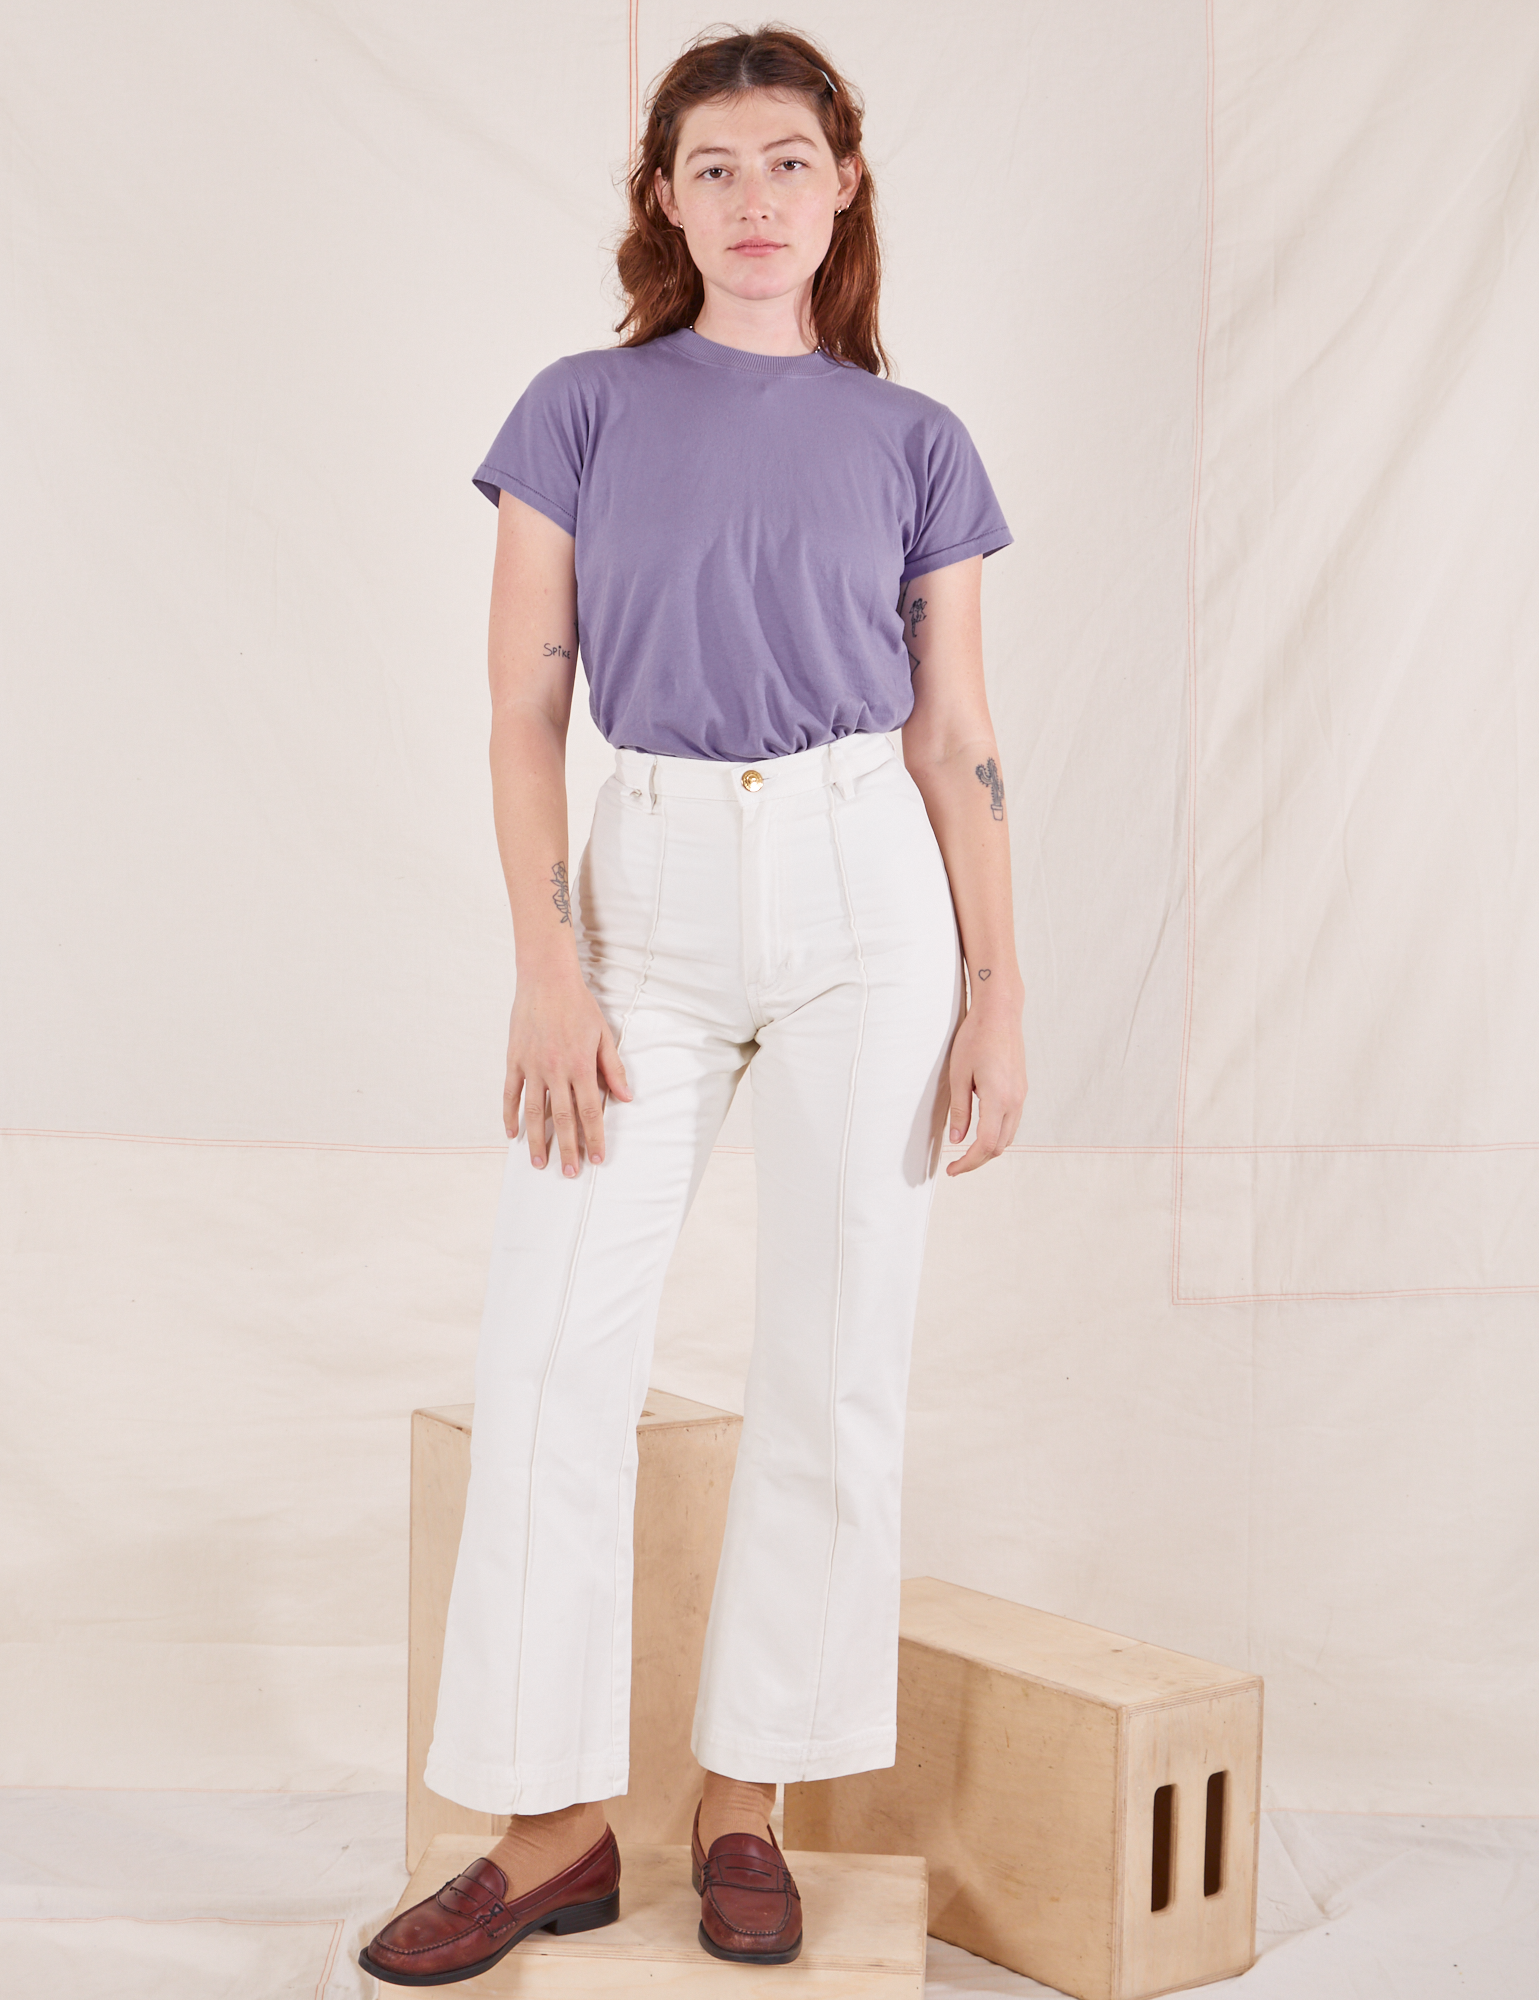 Alex is wearing P Organic Vintage Tee in Faded Grape paired with vintage off-white Western Pants